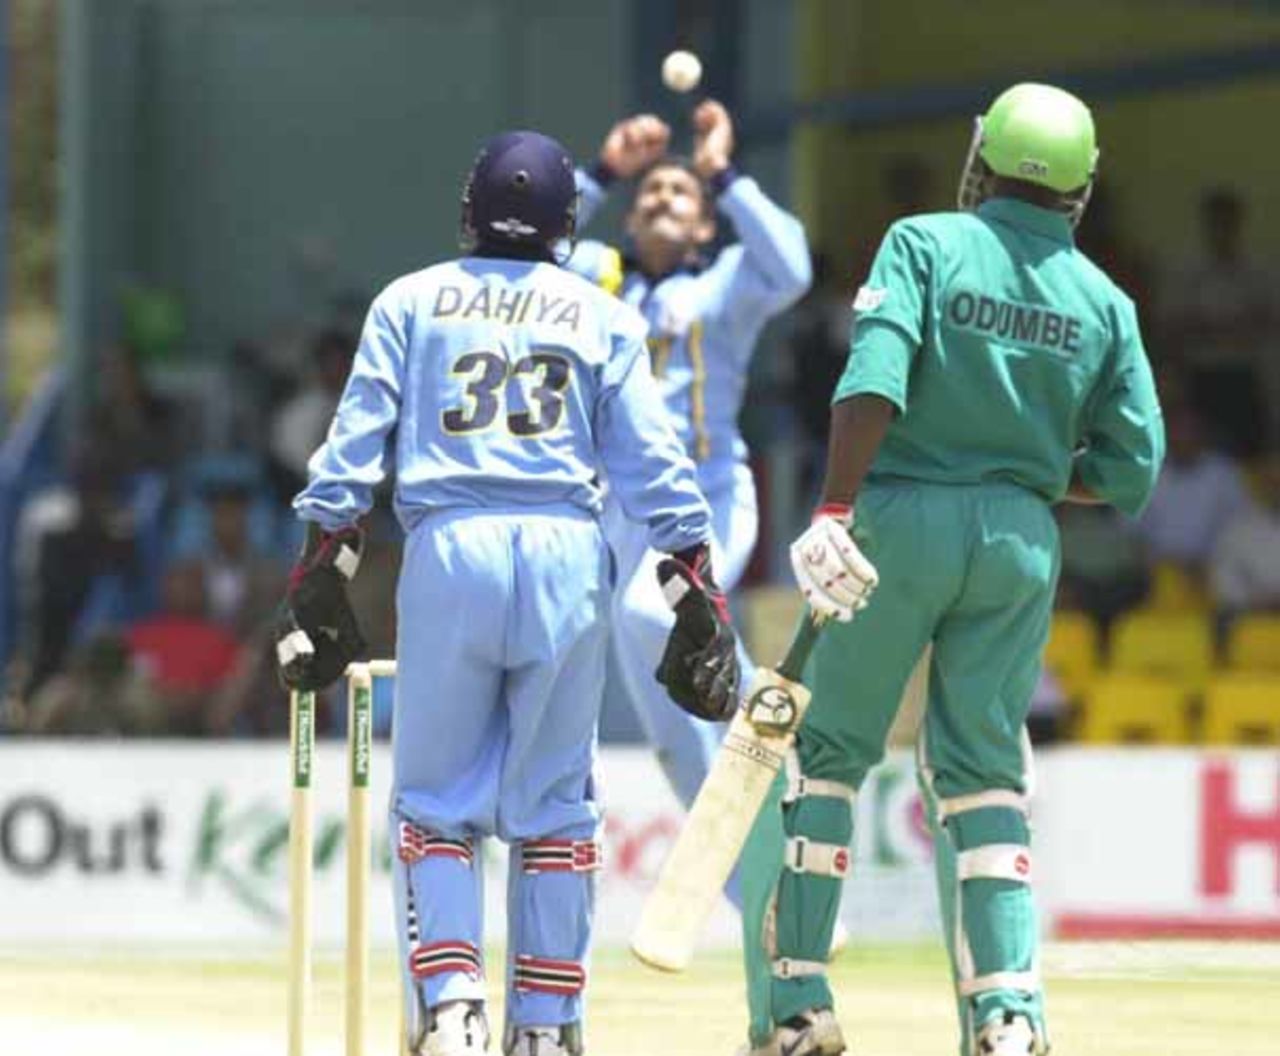 3 Oct 2000: Maurice Odumbe and Vijay Dahiya watch a ball lofted over the bowlers head during the first match of the ICC KnockOut between India  and Kenya at Gymkhana Club Ground, Nairobi.